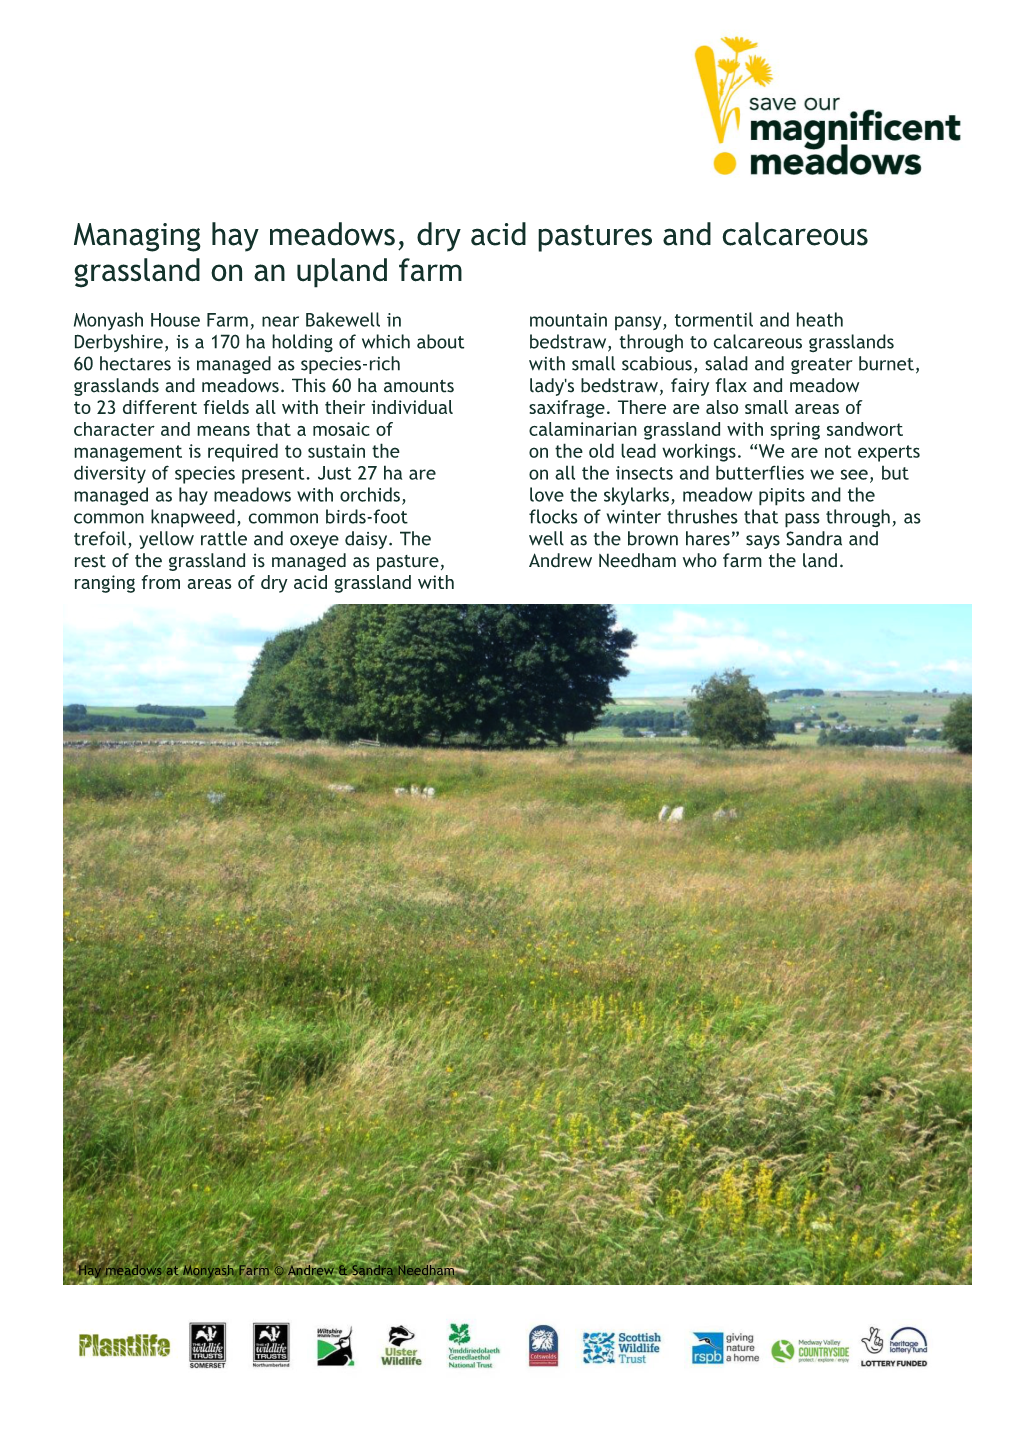 Managing Hay Meadows, Dry Acid Pastures and Calcareous Grassland on an Upland Farm